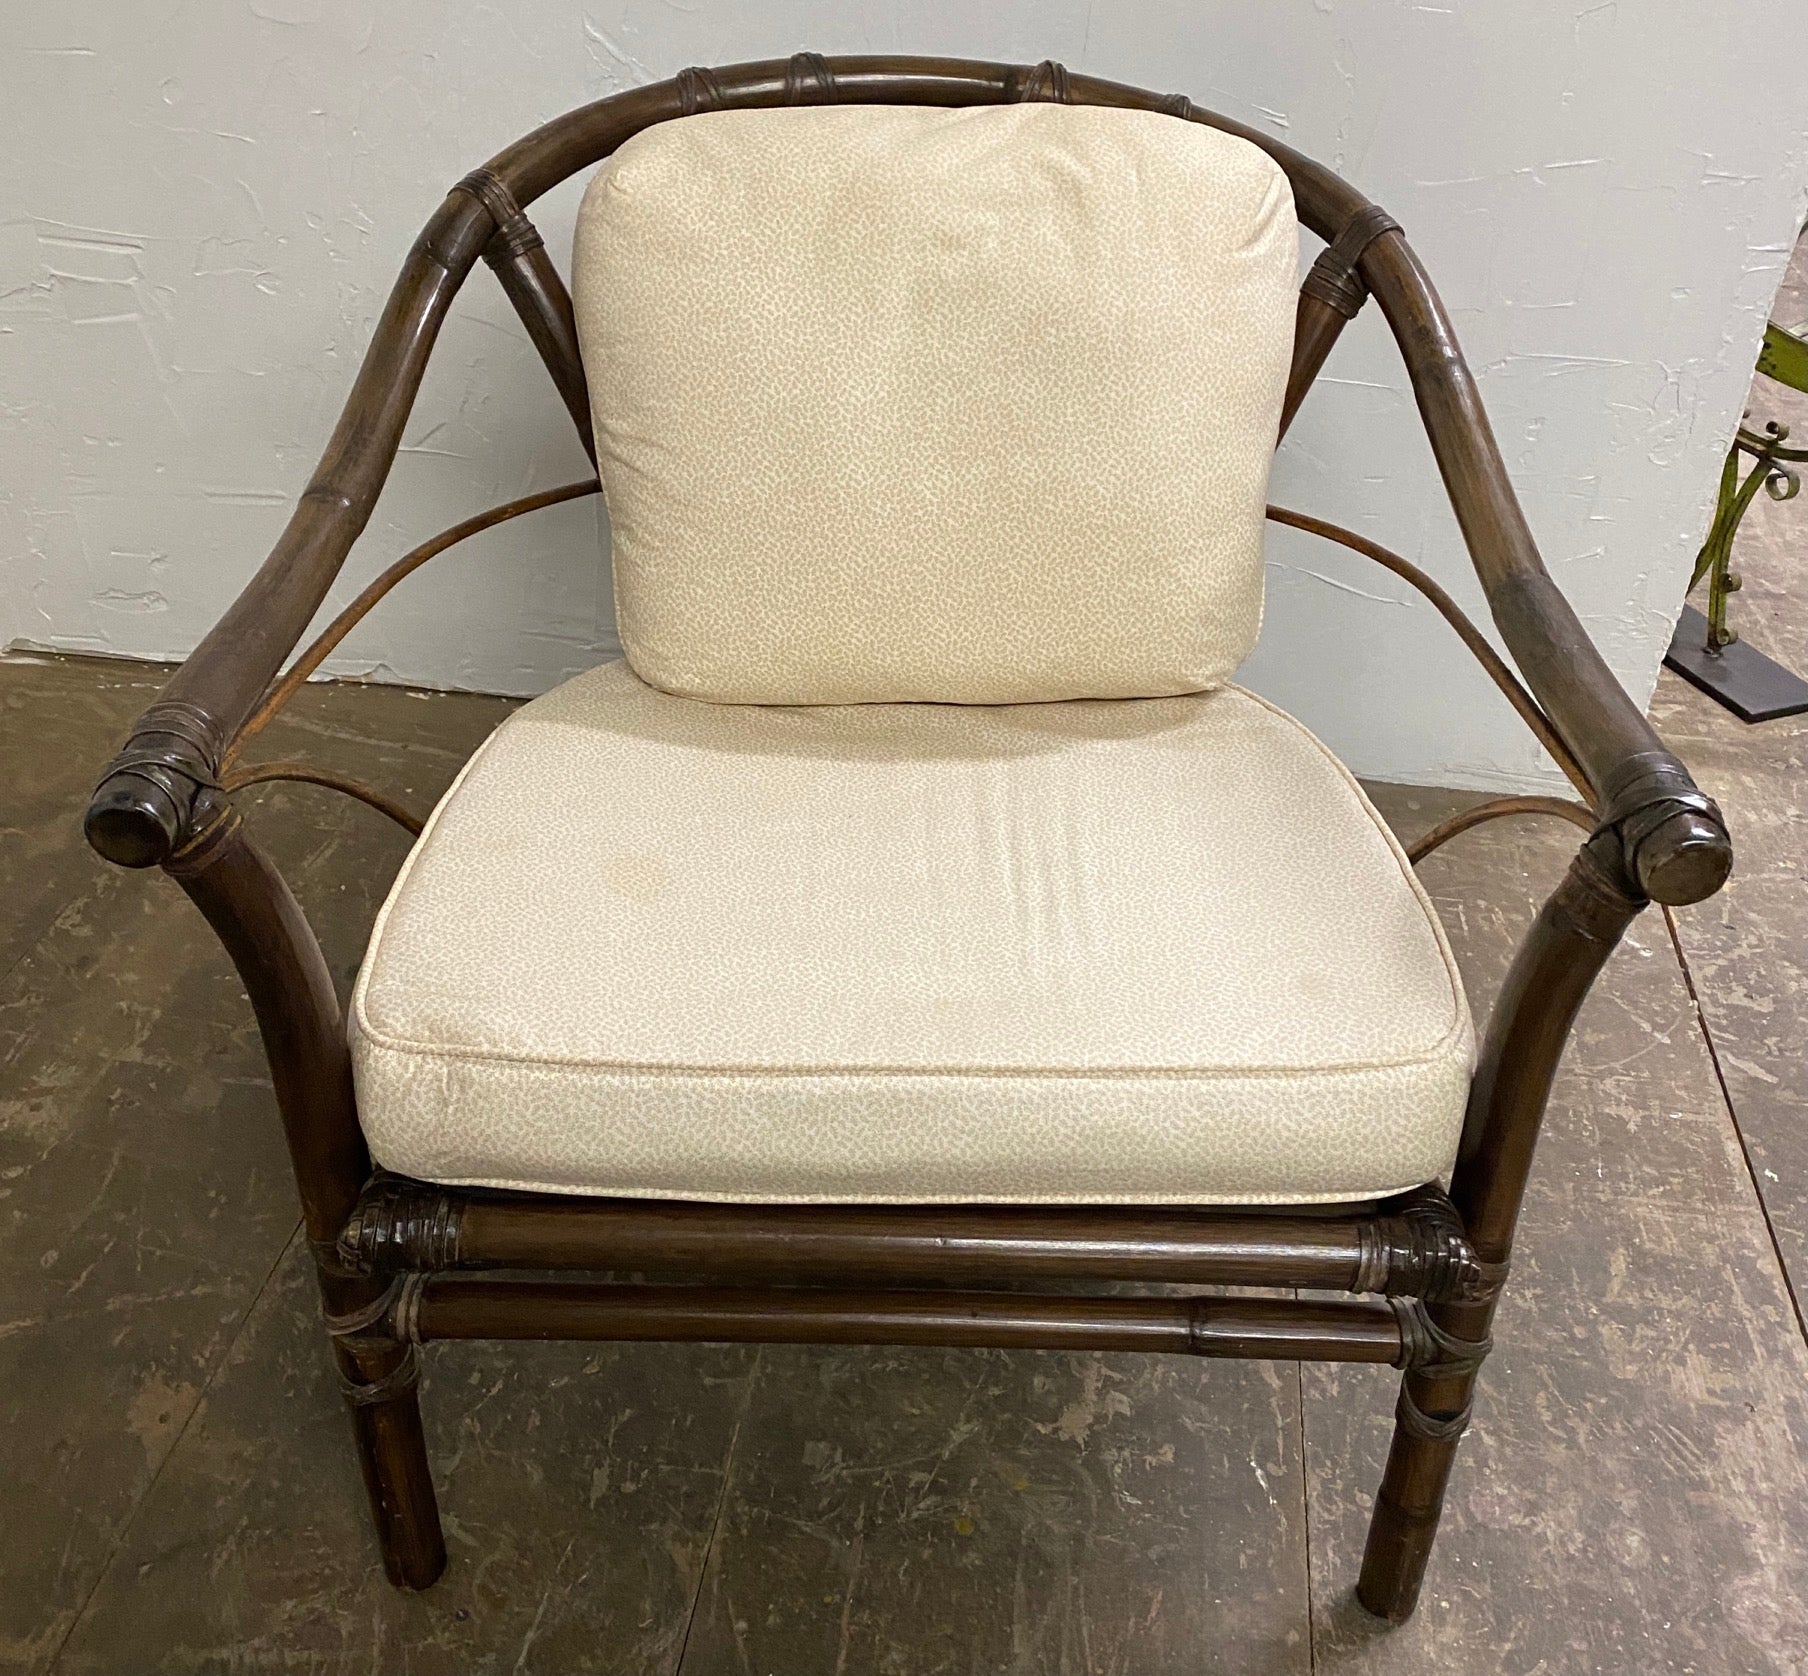 Stylish and elegant, the McGuire organic modern horseshoe rattan armed club chair with partial gilt finish is a classic. The rattan frame is reinforced with leather rawhide laces on the exposed joint. The chair has a loose back and seat cushions.